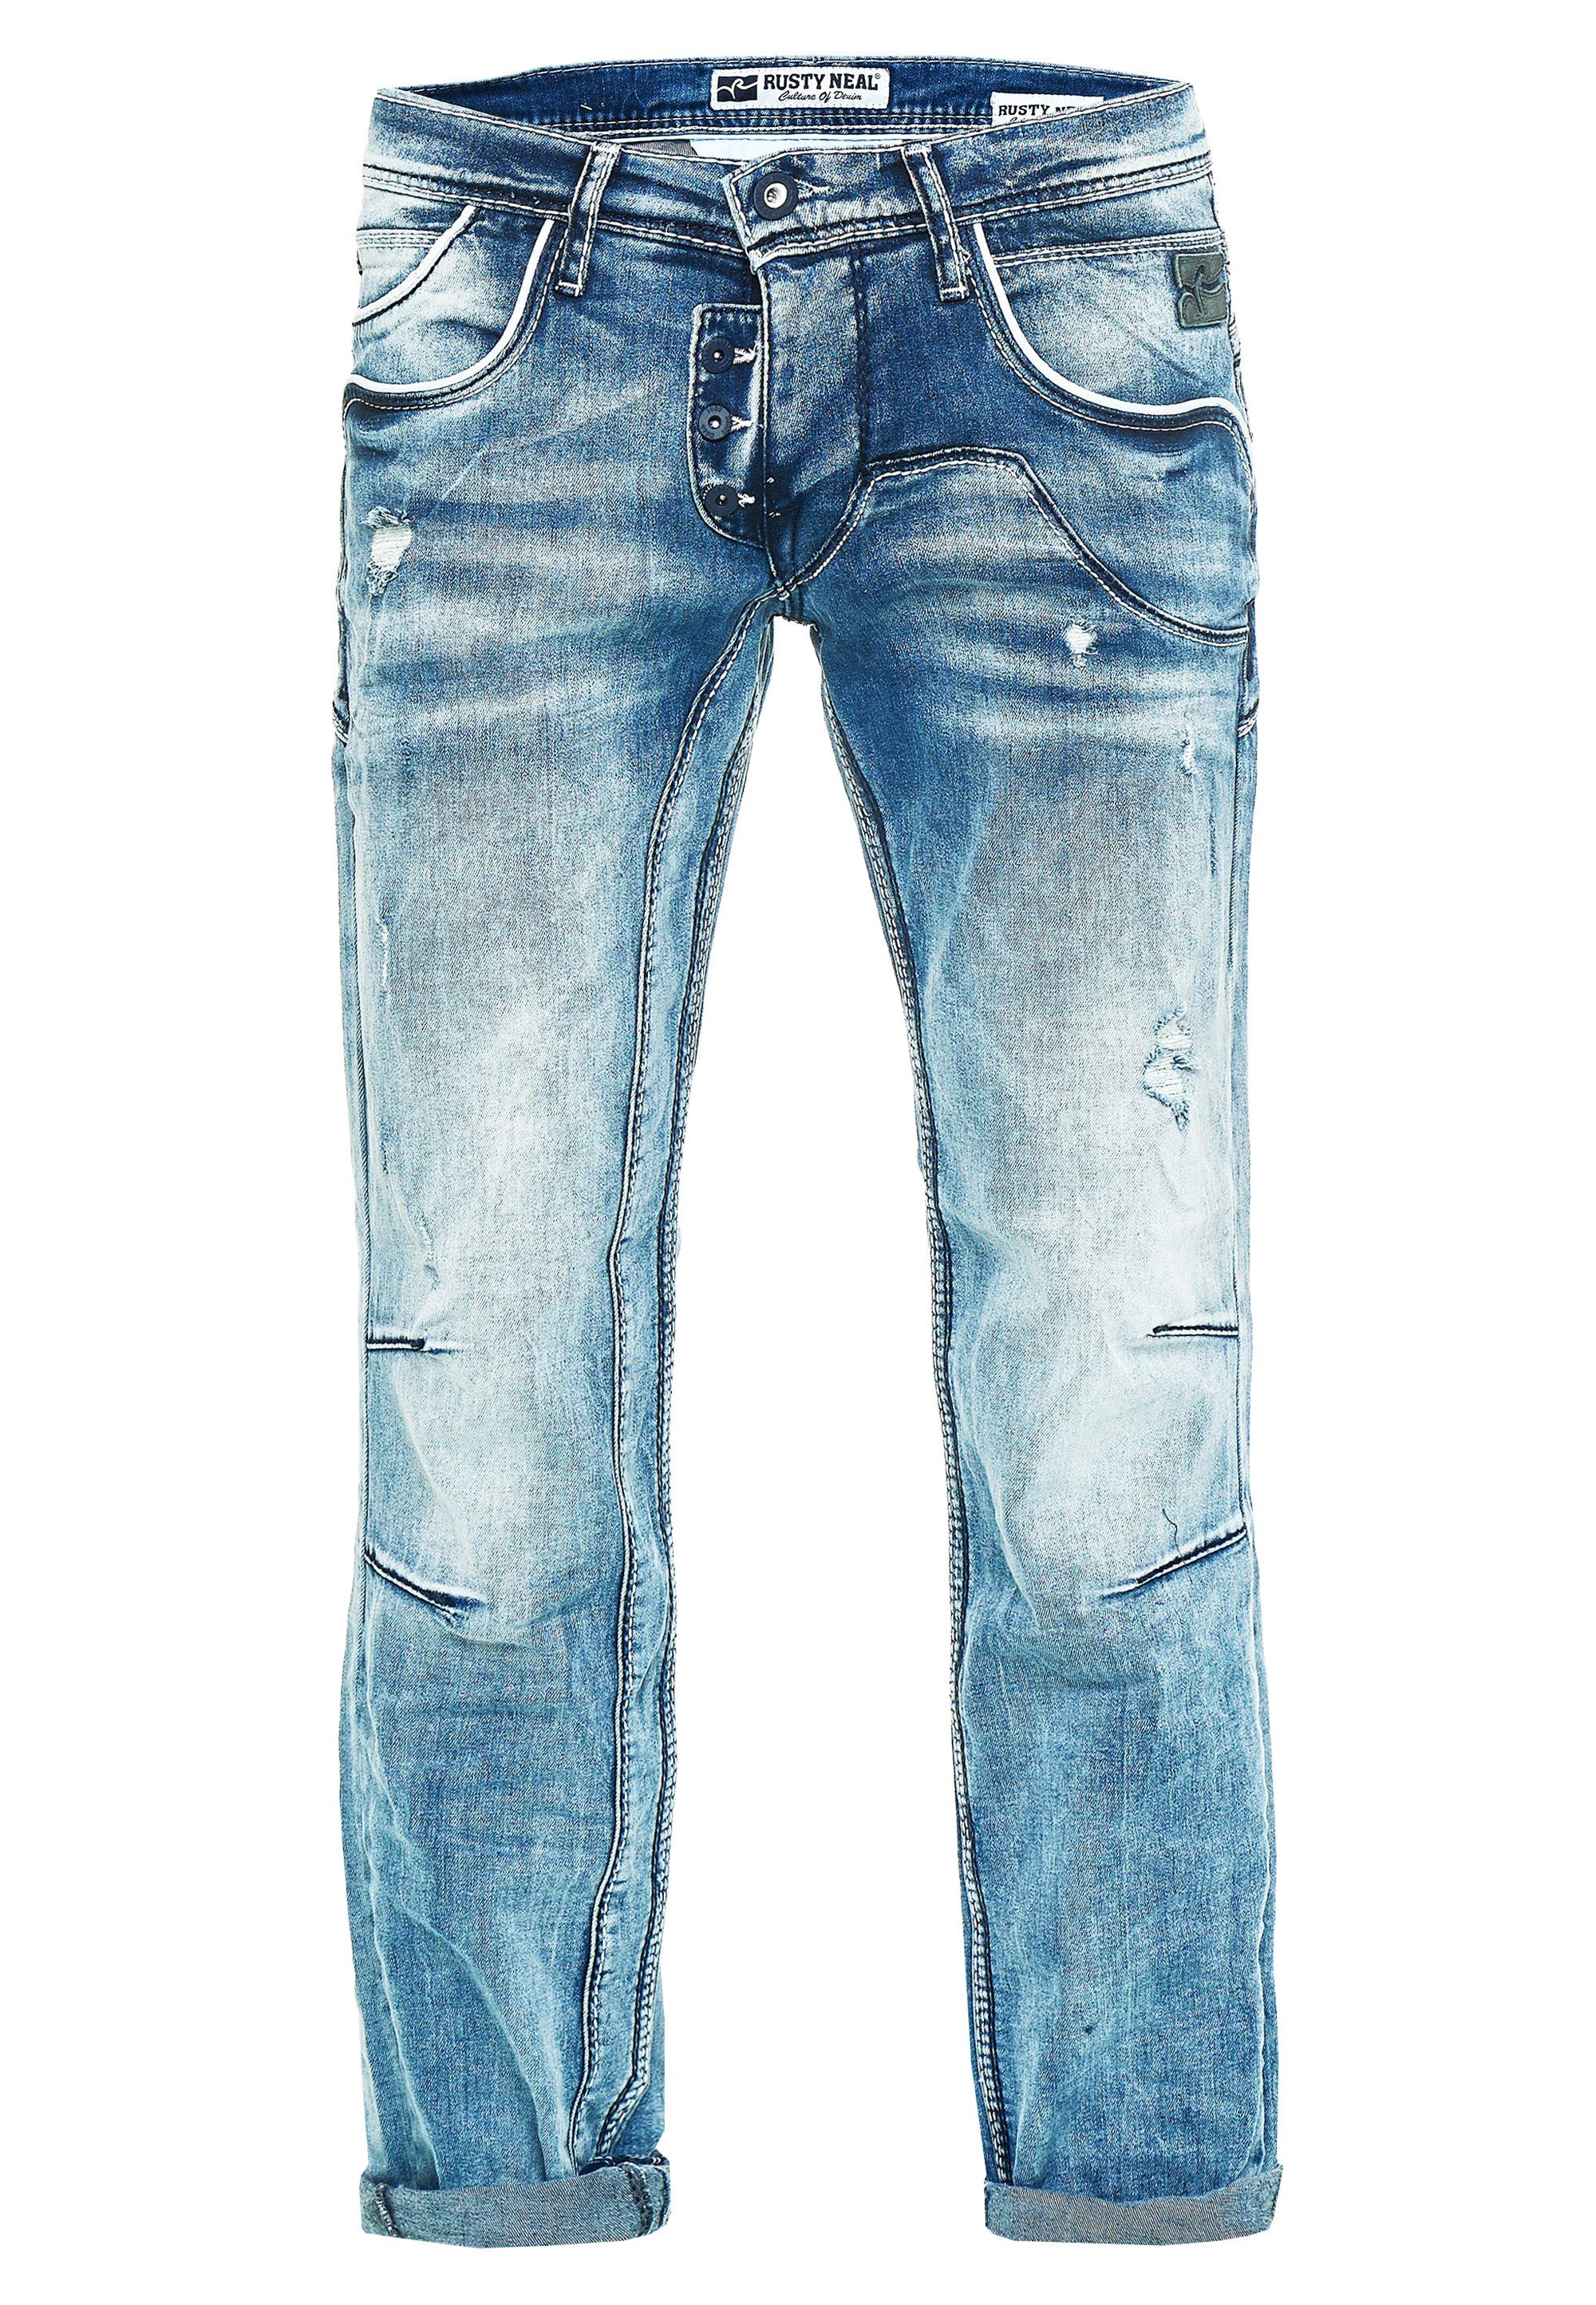 Rusty Neal Jeans Waschung mit cooler Bequeme